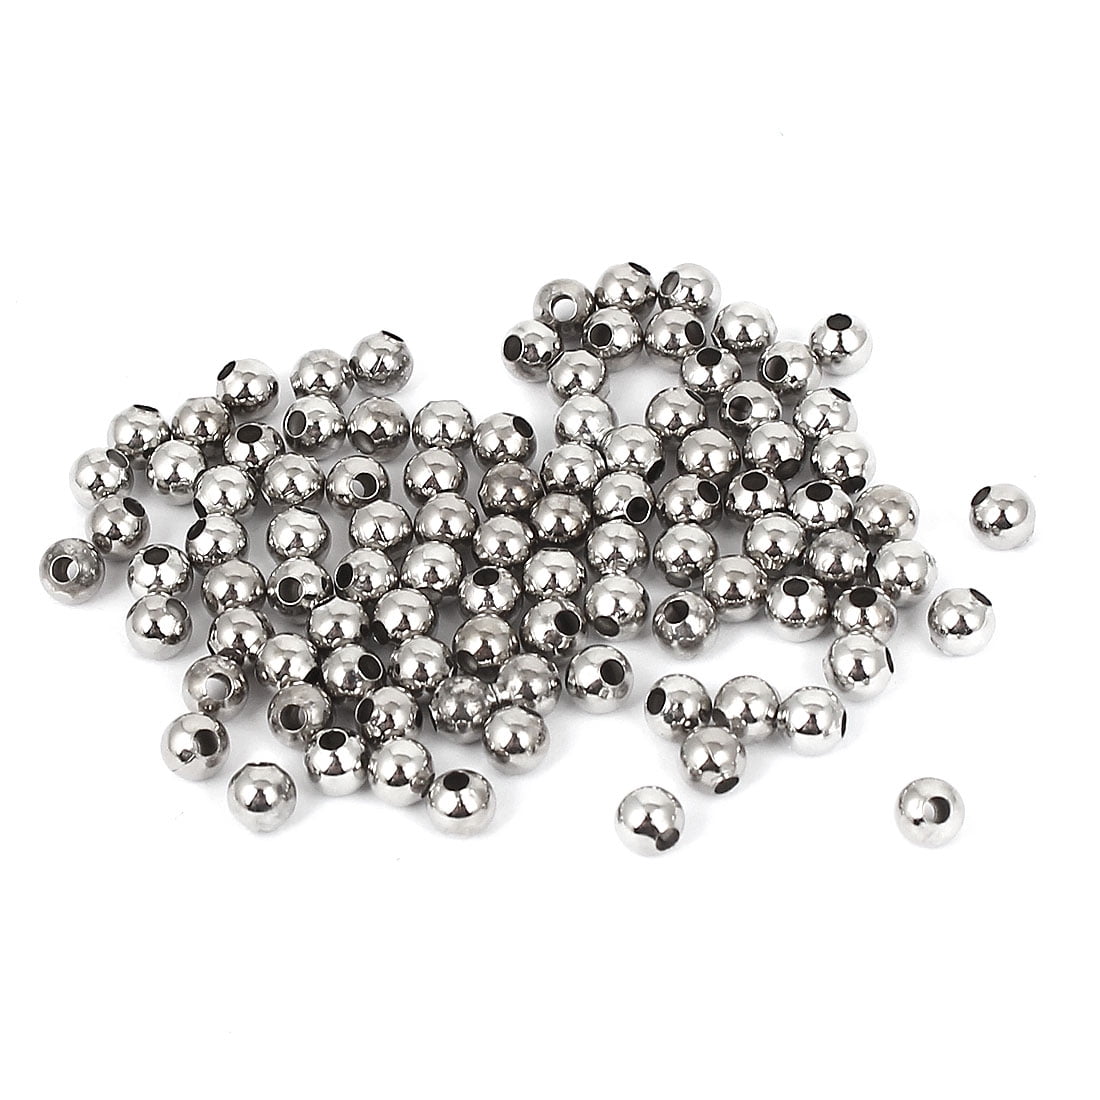 1000Pcs Silver Tone Smooth Ball Spacer Beads 3mm Dia. 